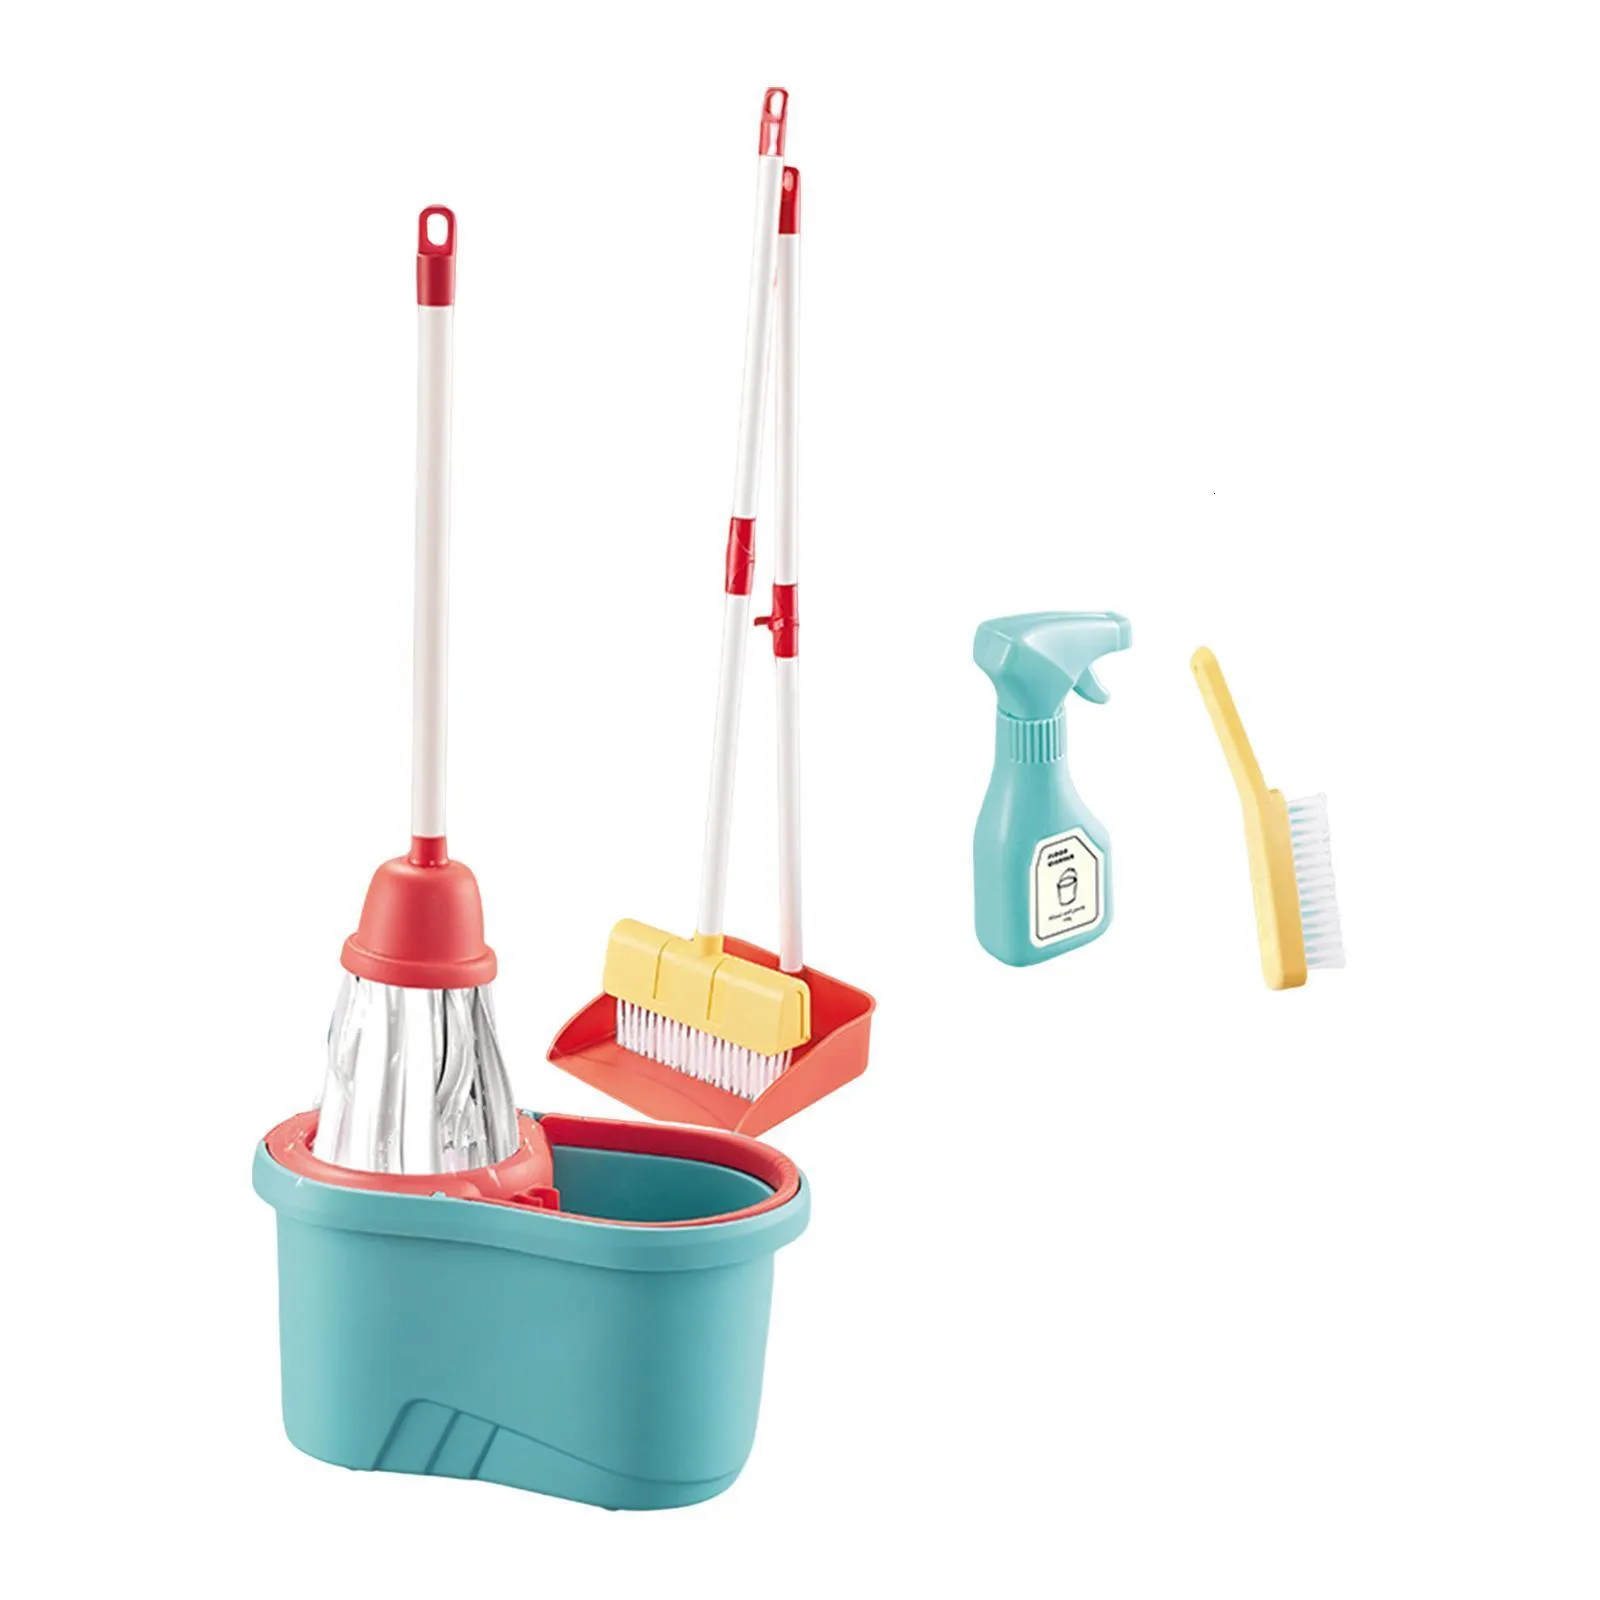 Kids Cleaning Set Role Play Toy Pretend Play House Cleaning Tools Developmental Toy for Kids